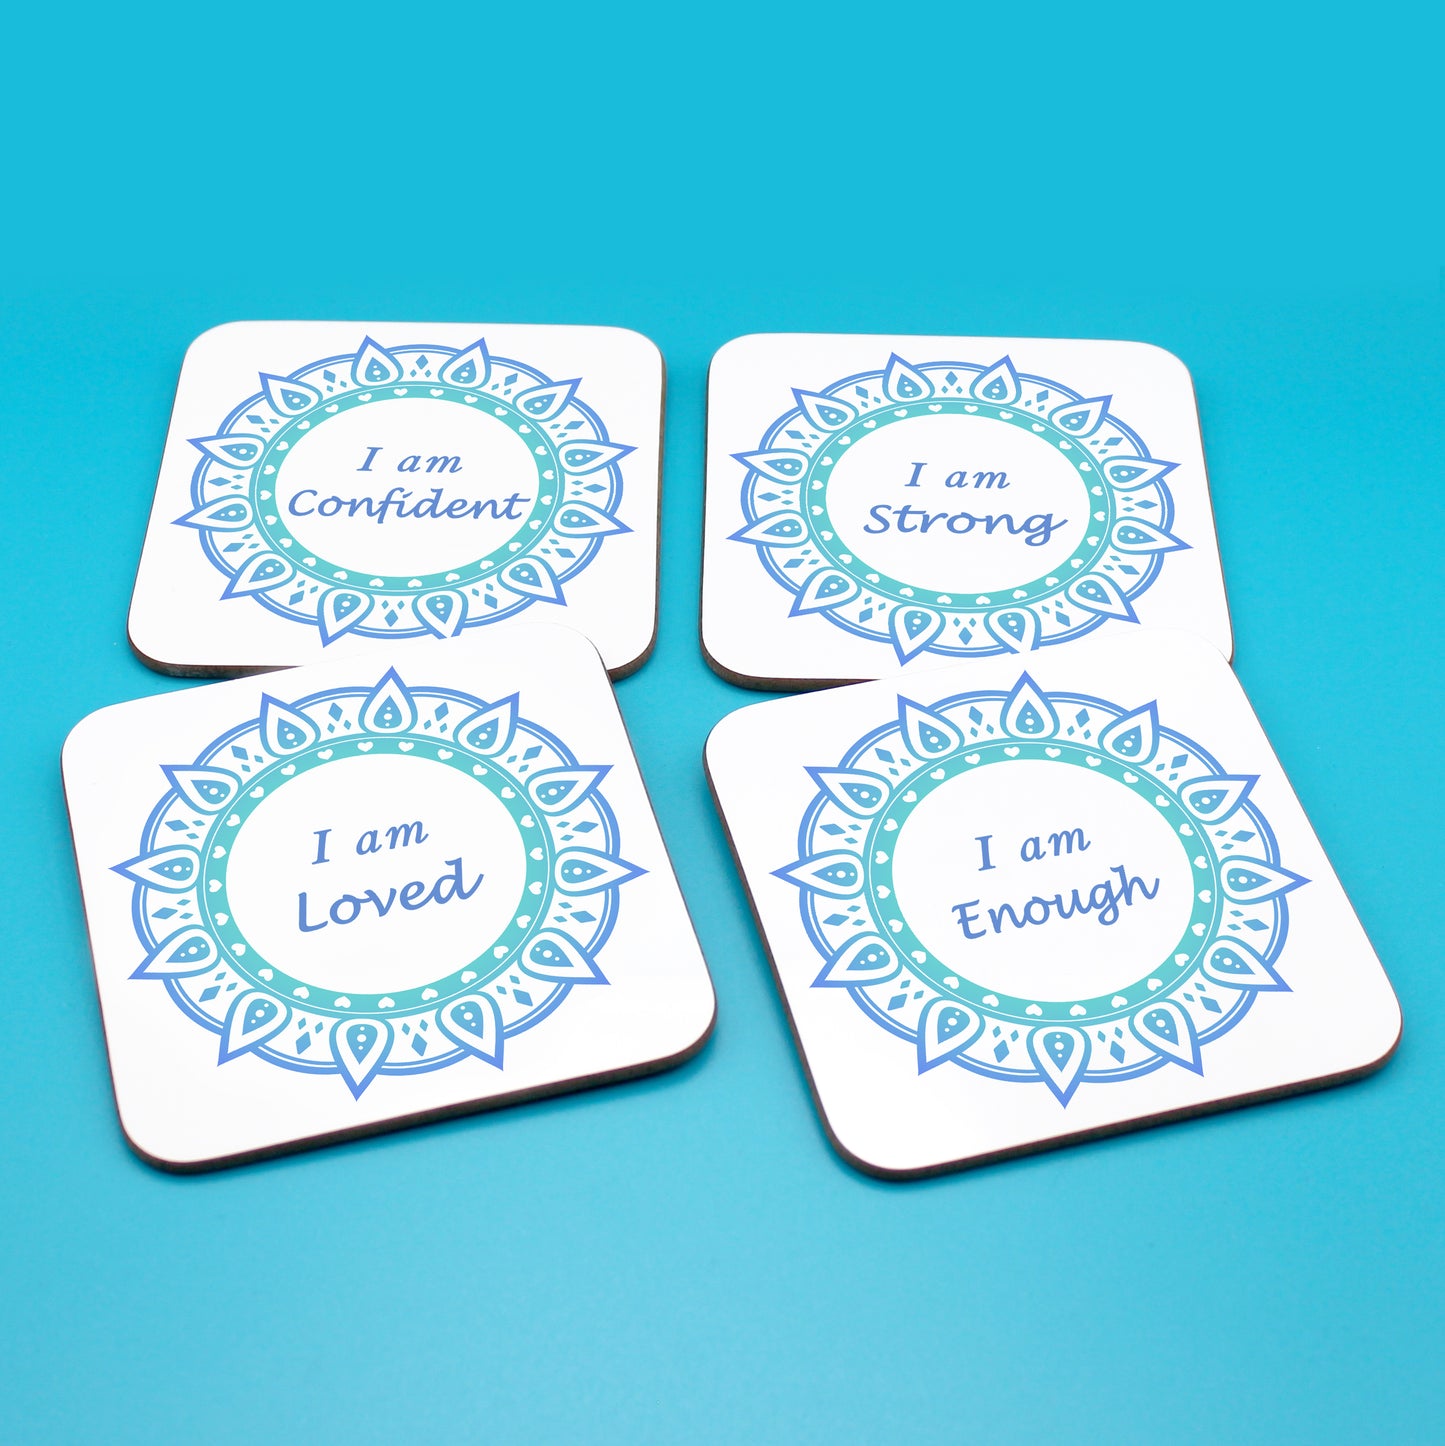 Wellbeing gift. Four square wooden backed positive affirmations coaster set. Mandala design with daily affirmation wording inside the mandala.  Each Affirmations coaster individually reads I am Loved, I am Enough, I am Confident, I am Strong (all mandalas are blue in this set)